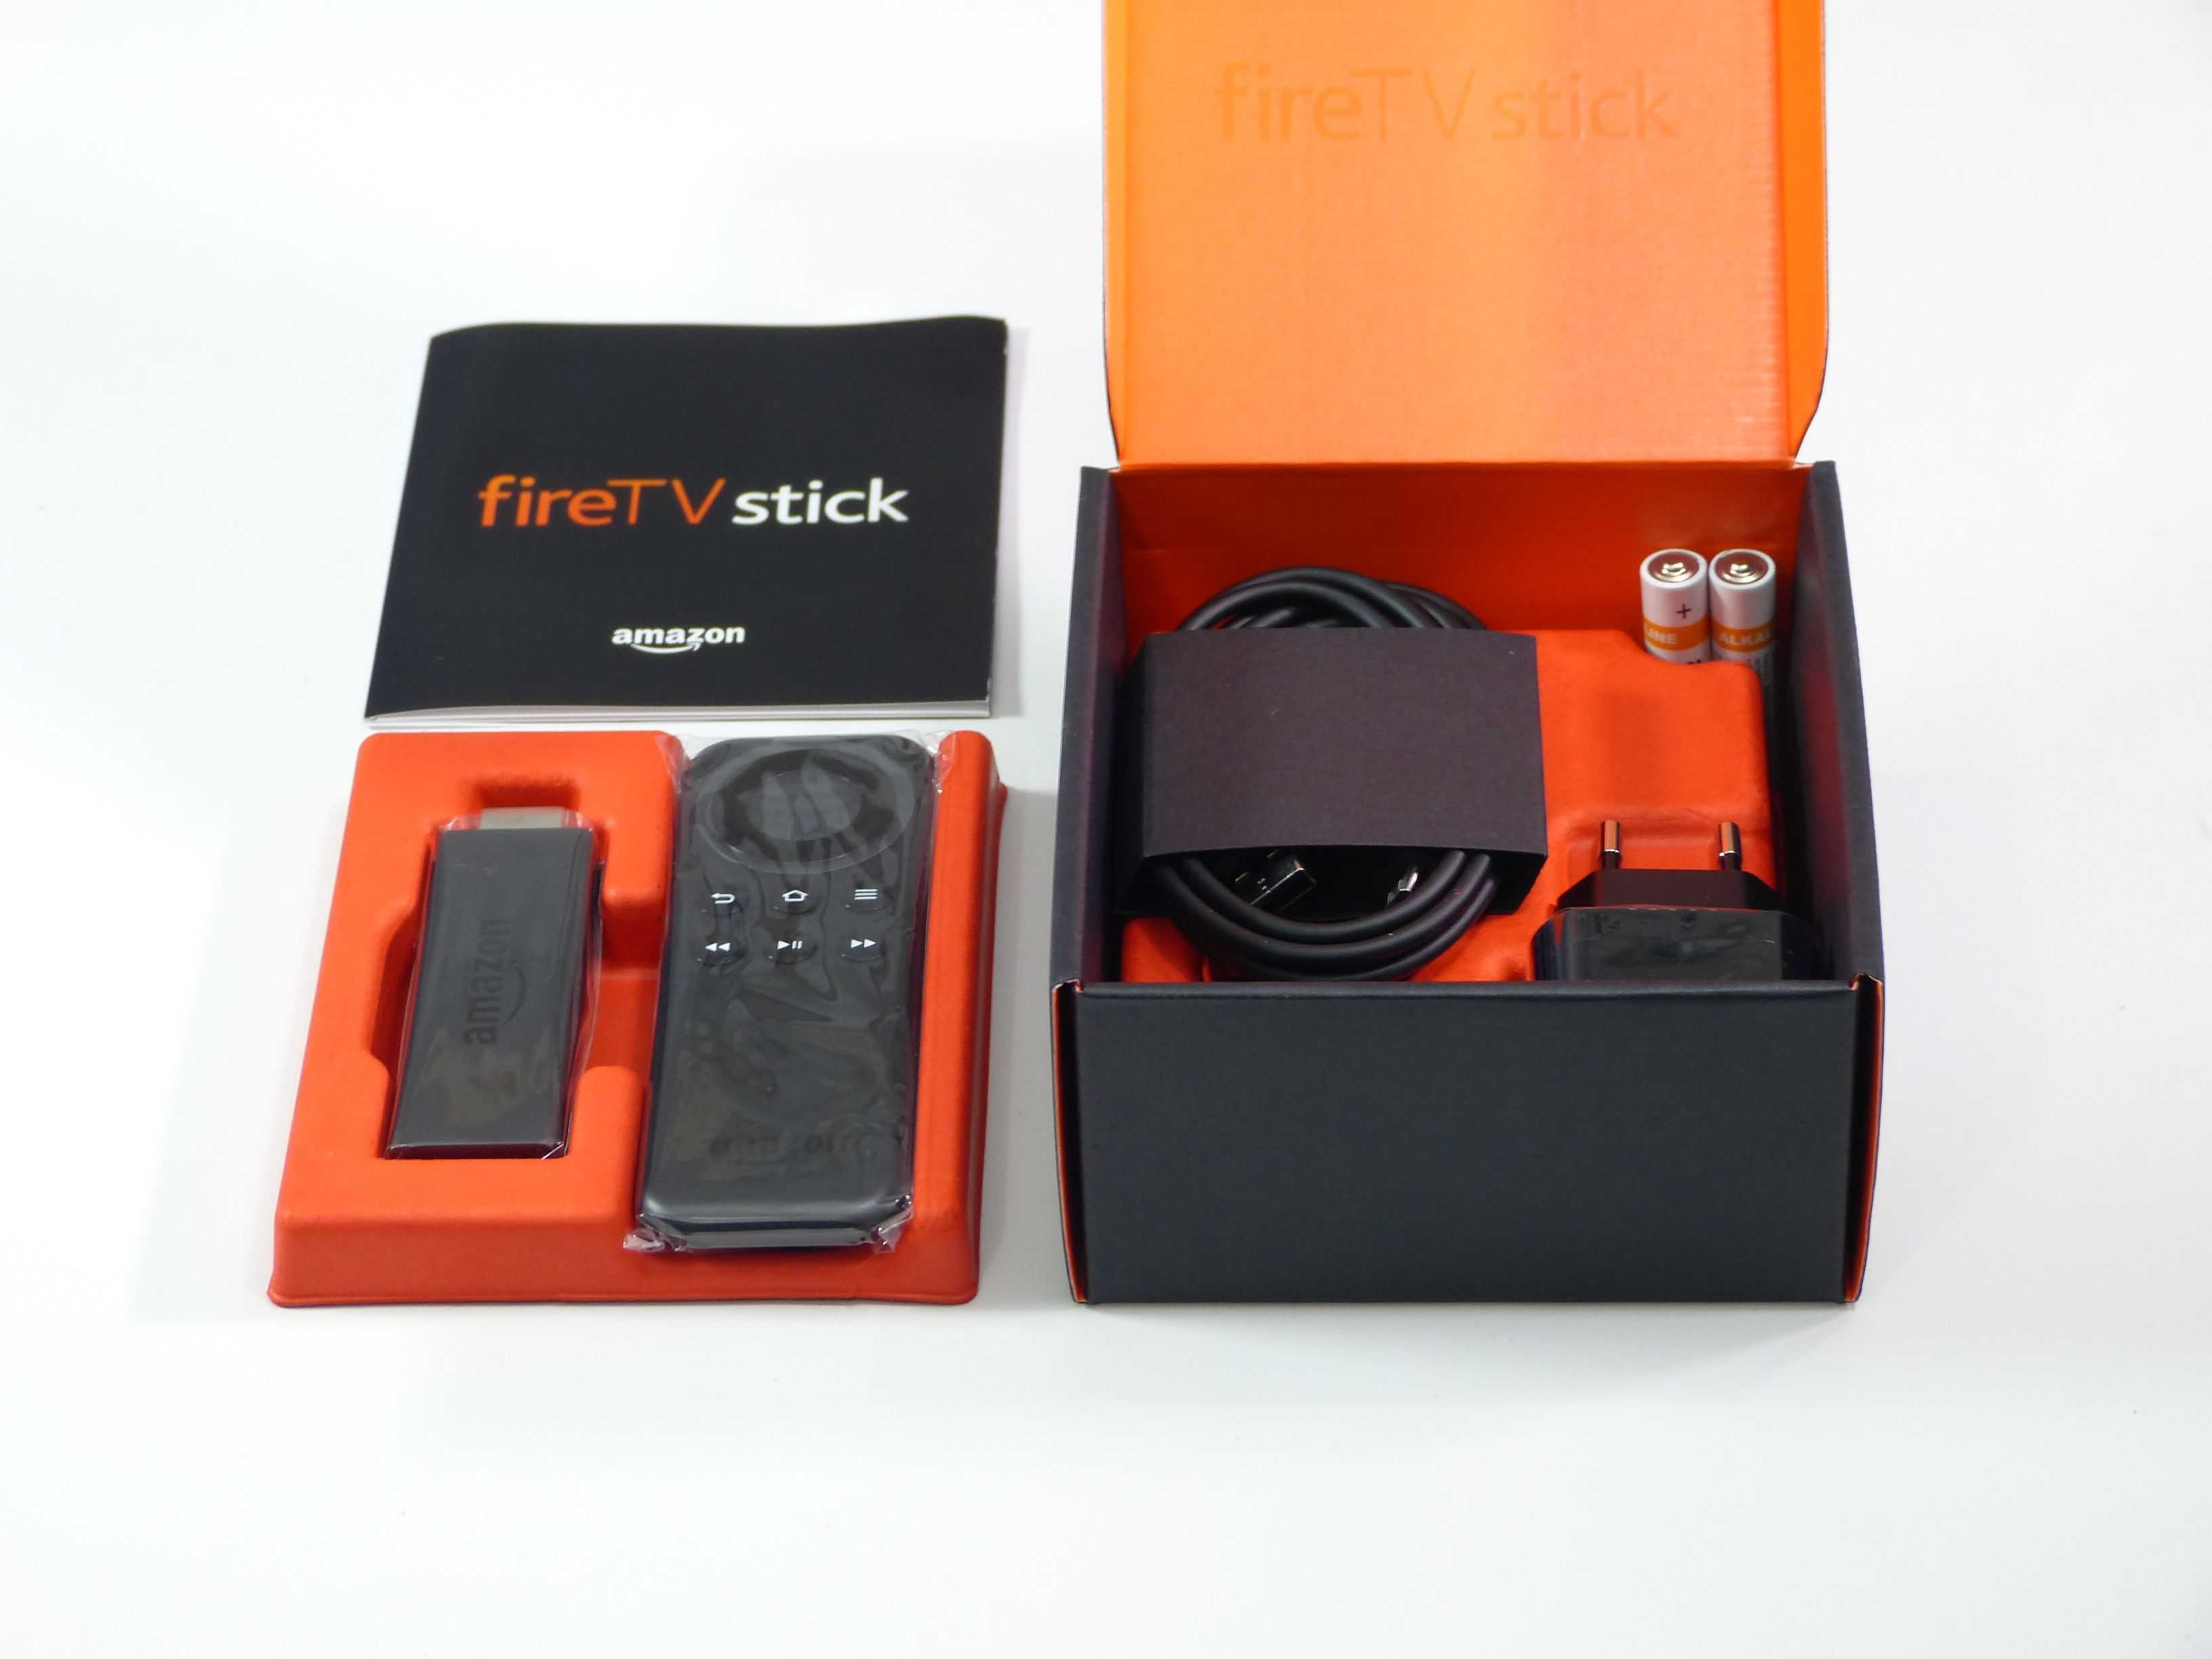 Amazon Fire TV Stick Review (Focus on Miracast.)